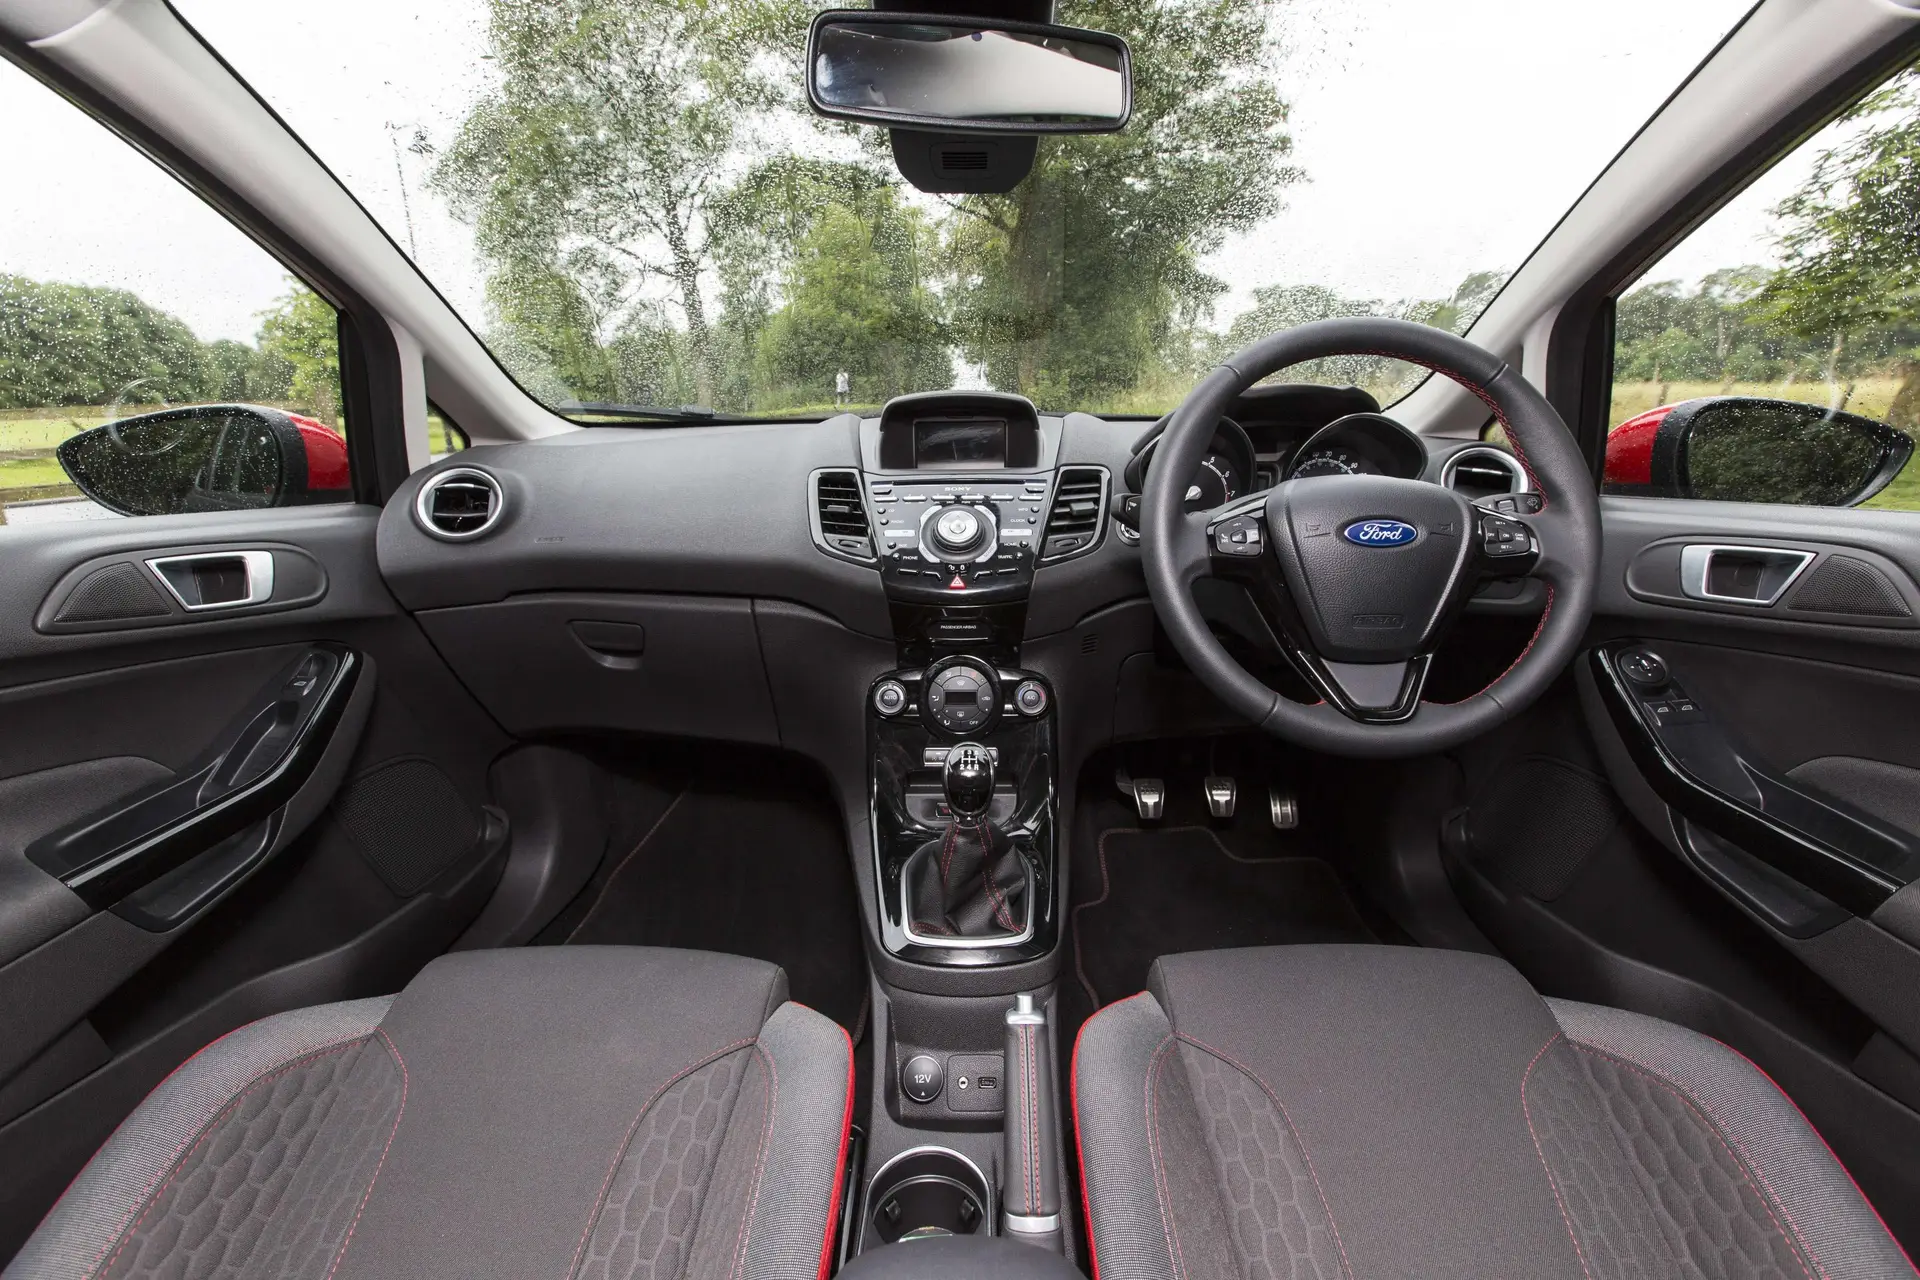 Used Ford Fiesta (2013-2017) Review Interior 